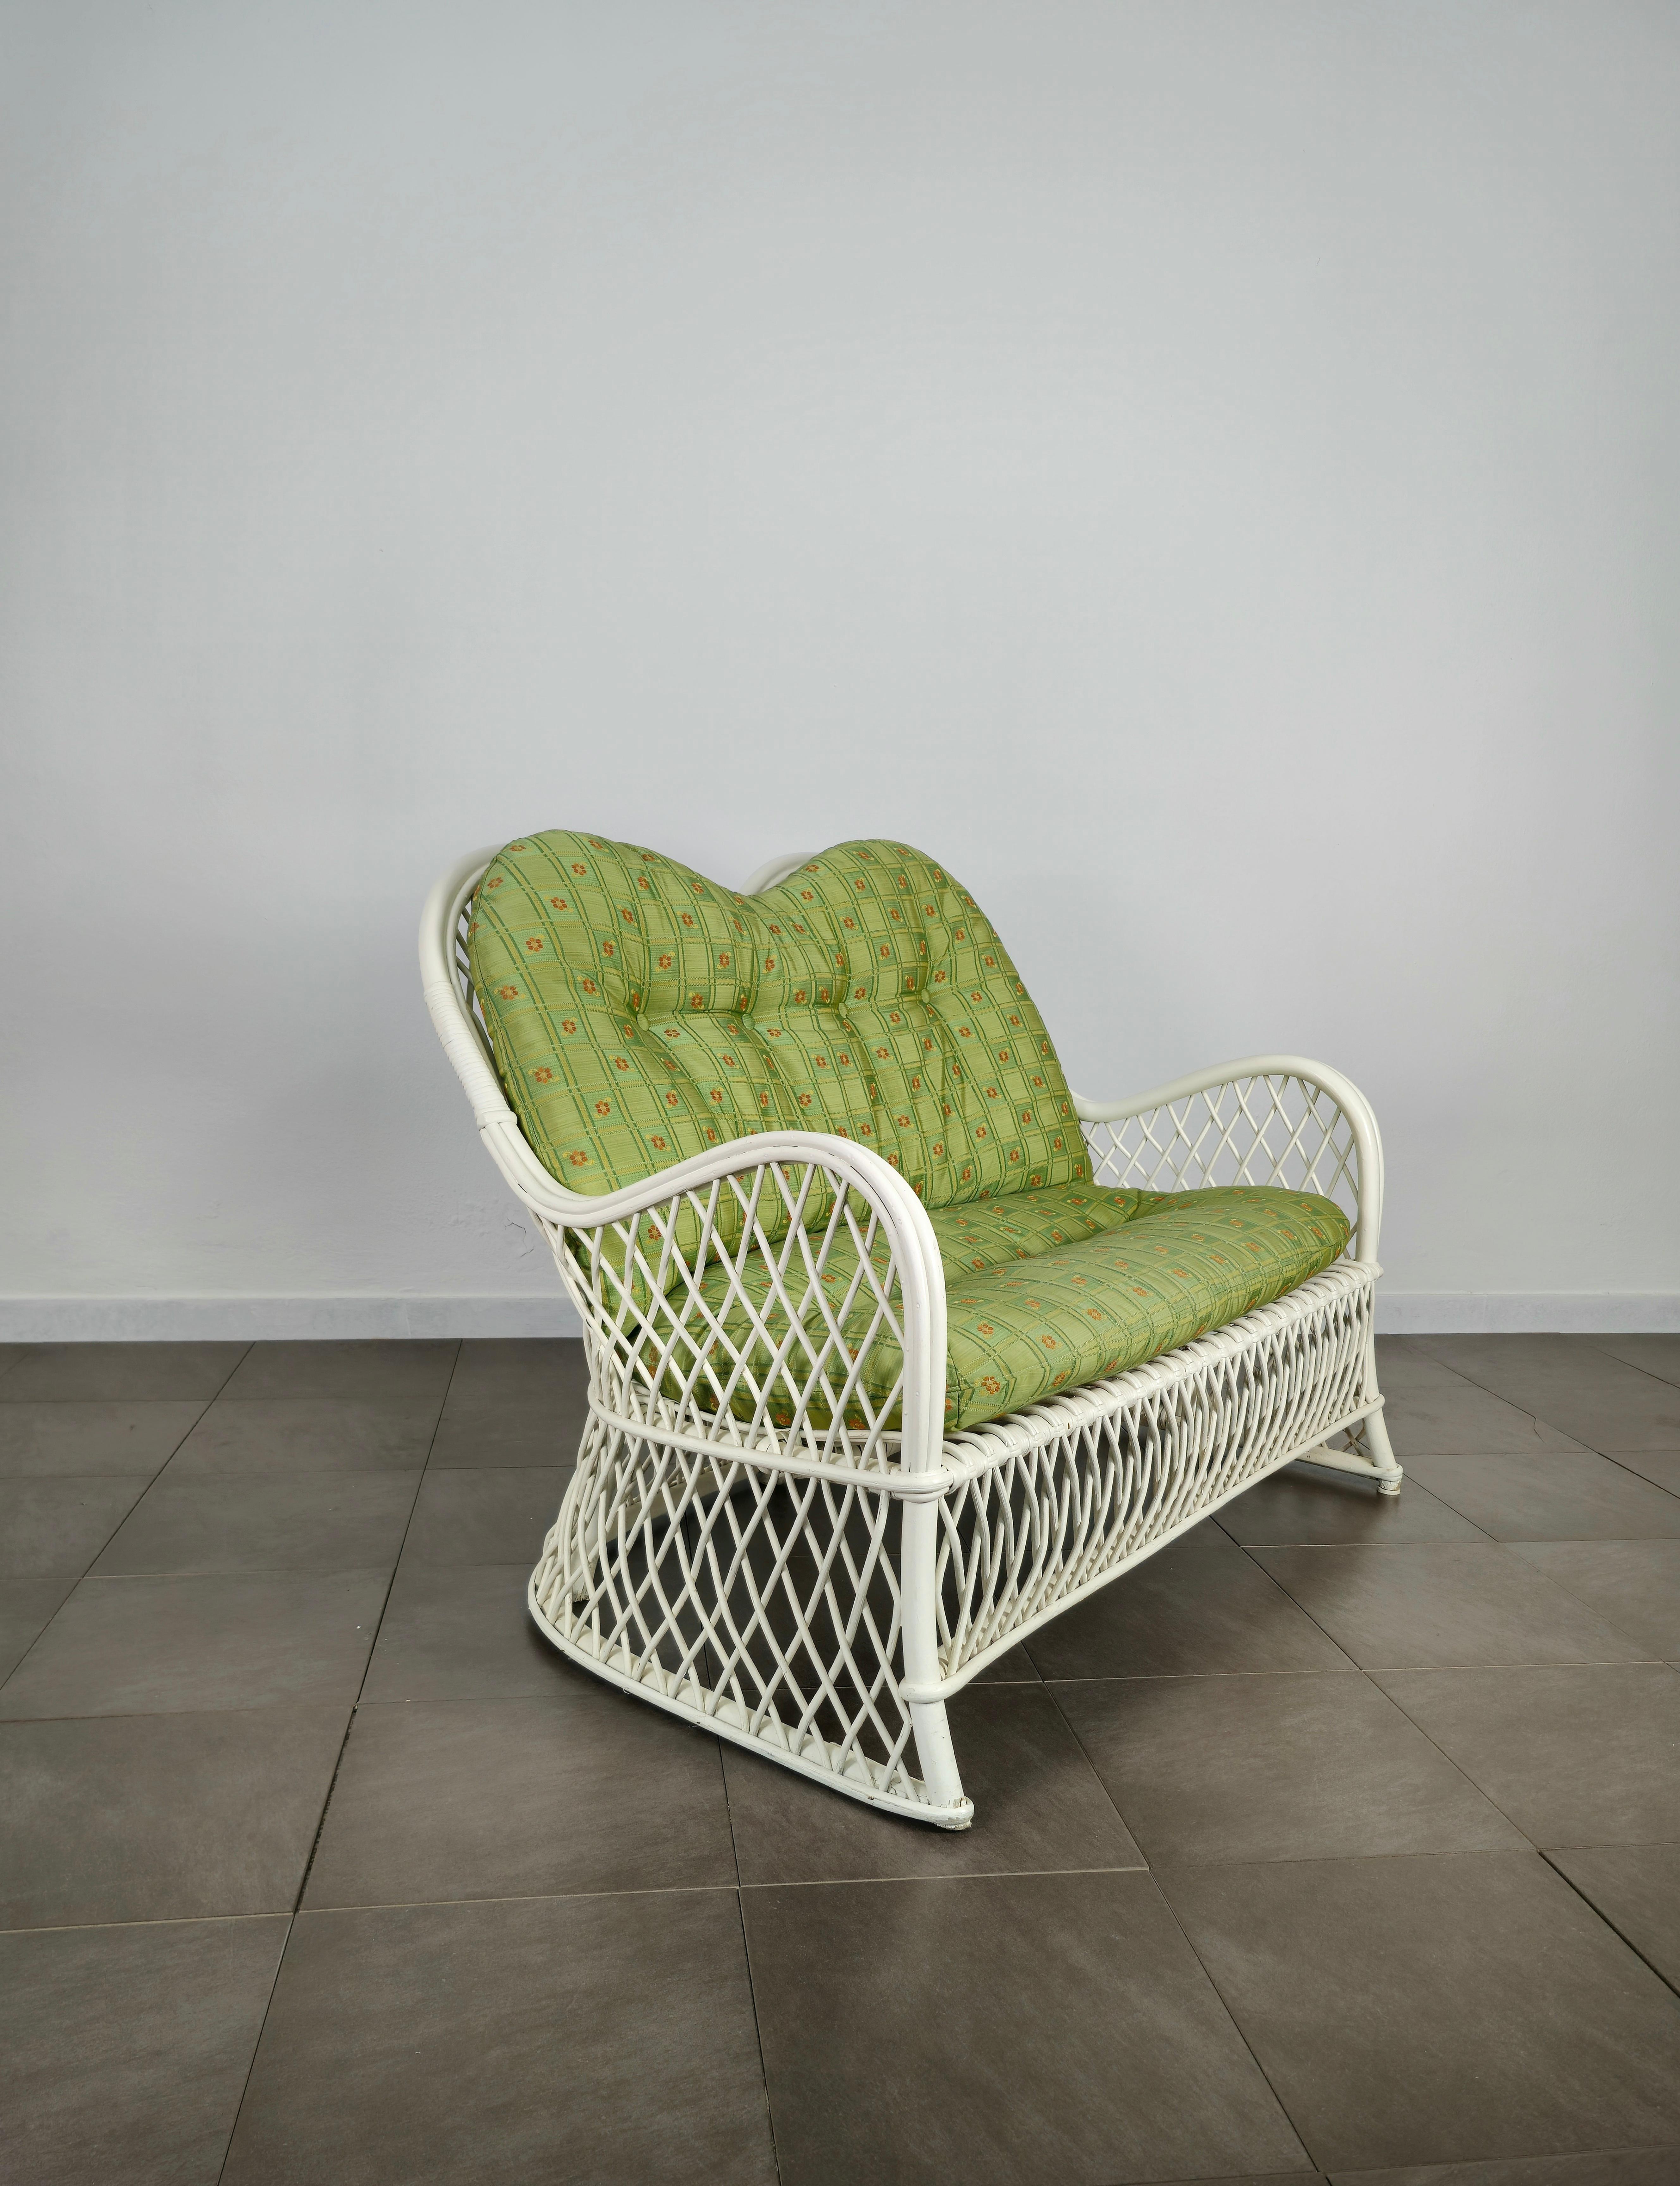 Mid-Century Modern Sofa Bamboo Rattan Green Fabric Attributed to Vivai del Sud Midcentury, 1970s For Sale